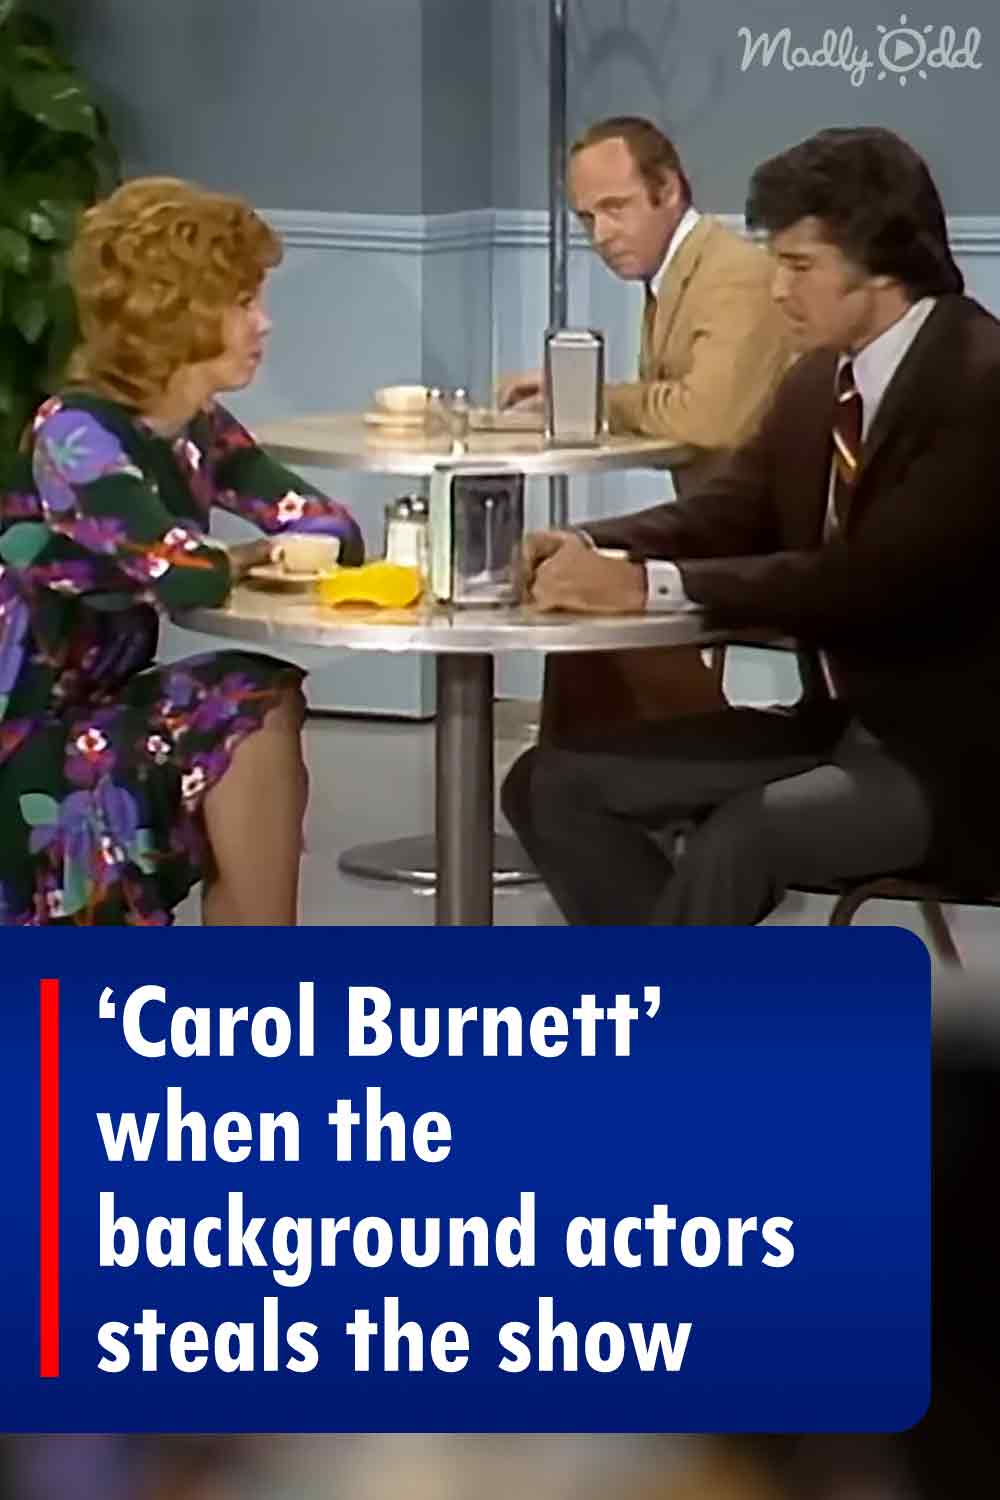 ‘Carol Burnett’ when the background actors steals the show